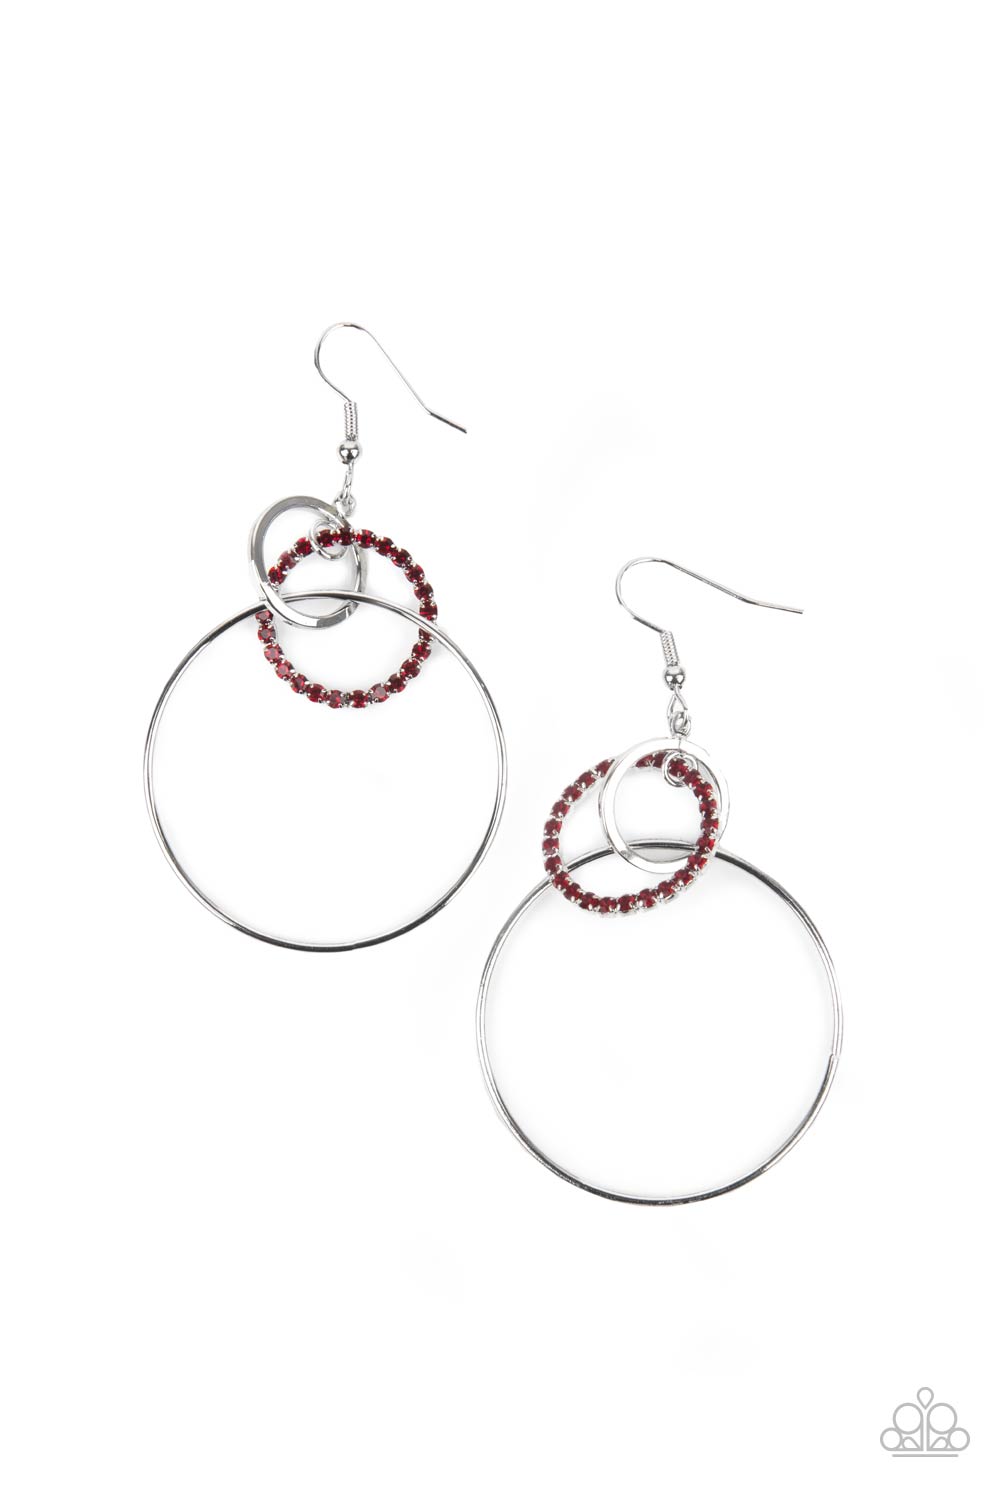 Paparazzi Accessories In an Orderly Fashion - Red Earrings - Lady T Accessories